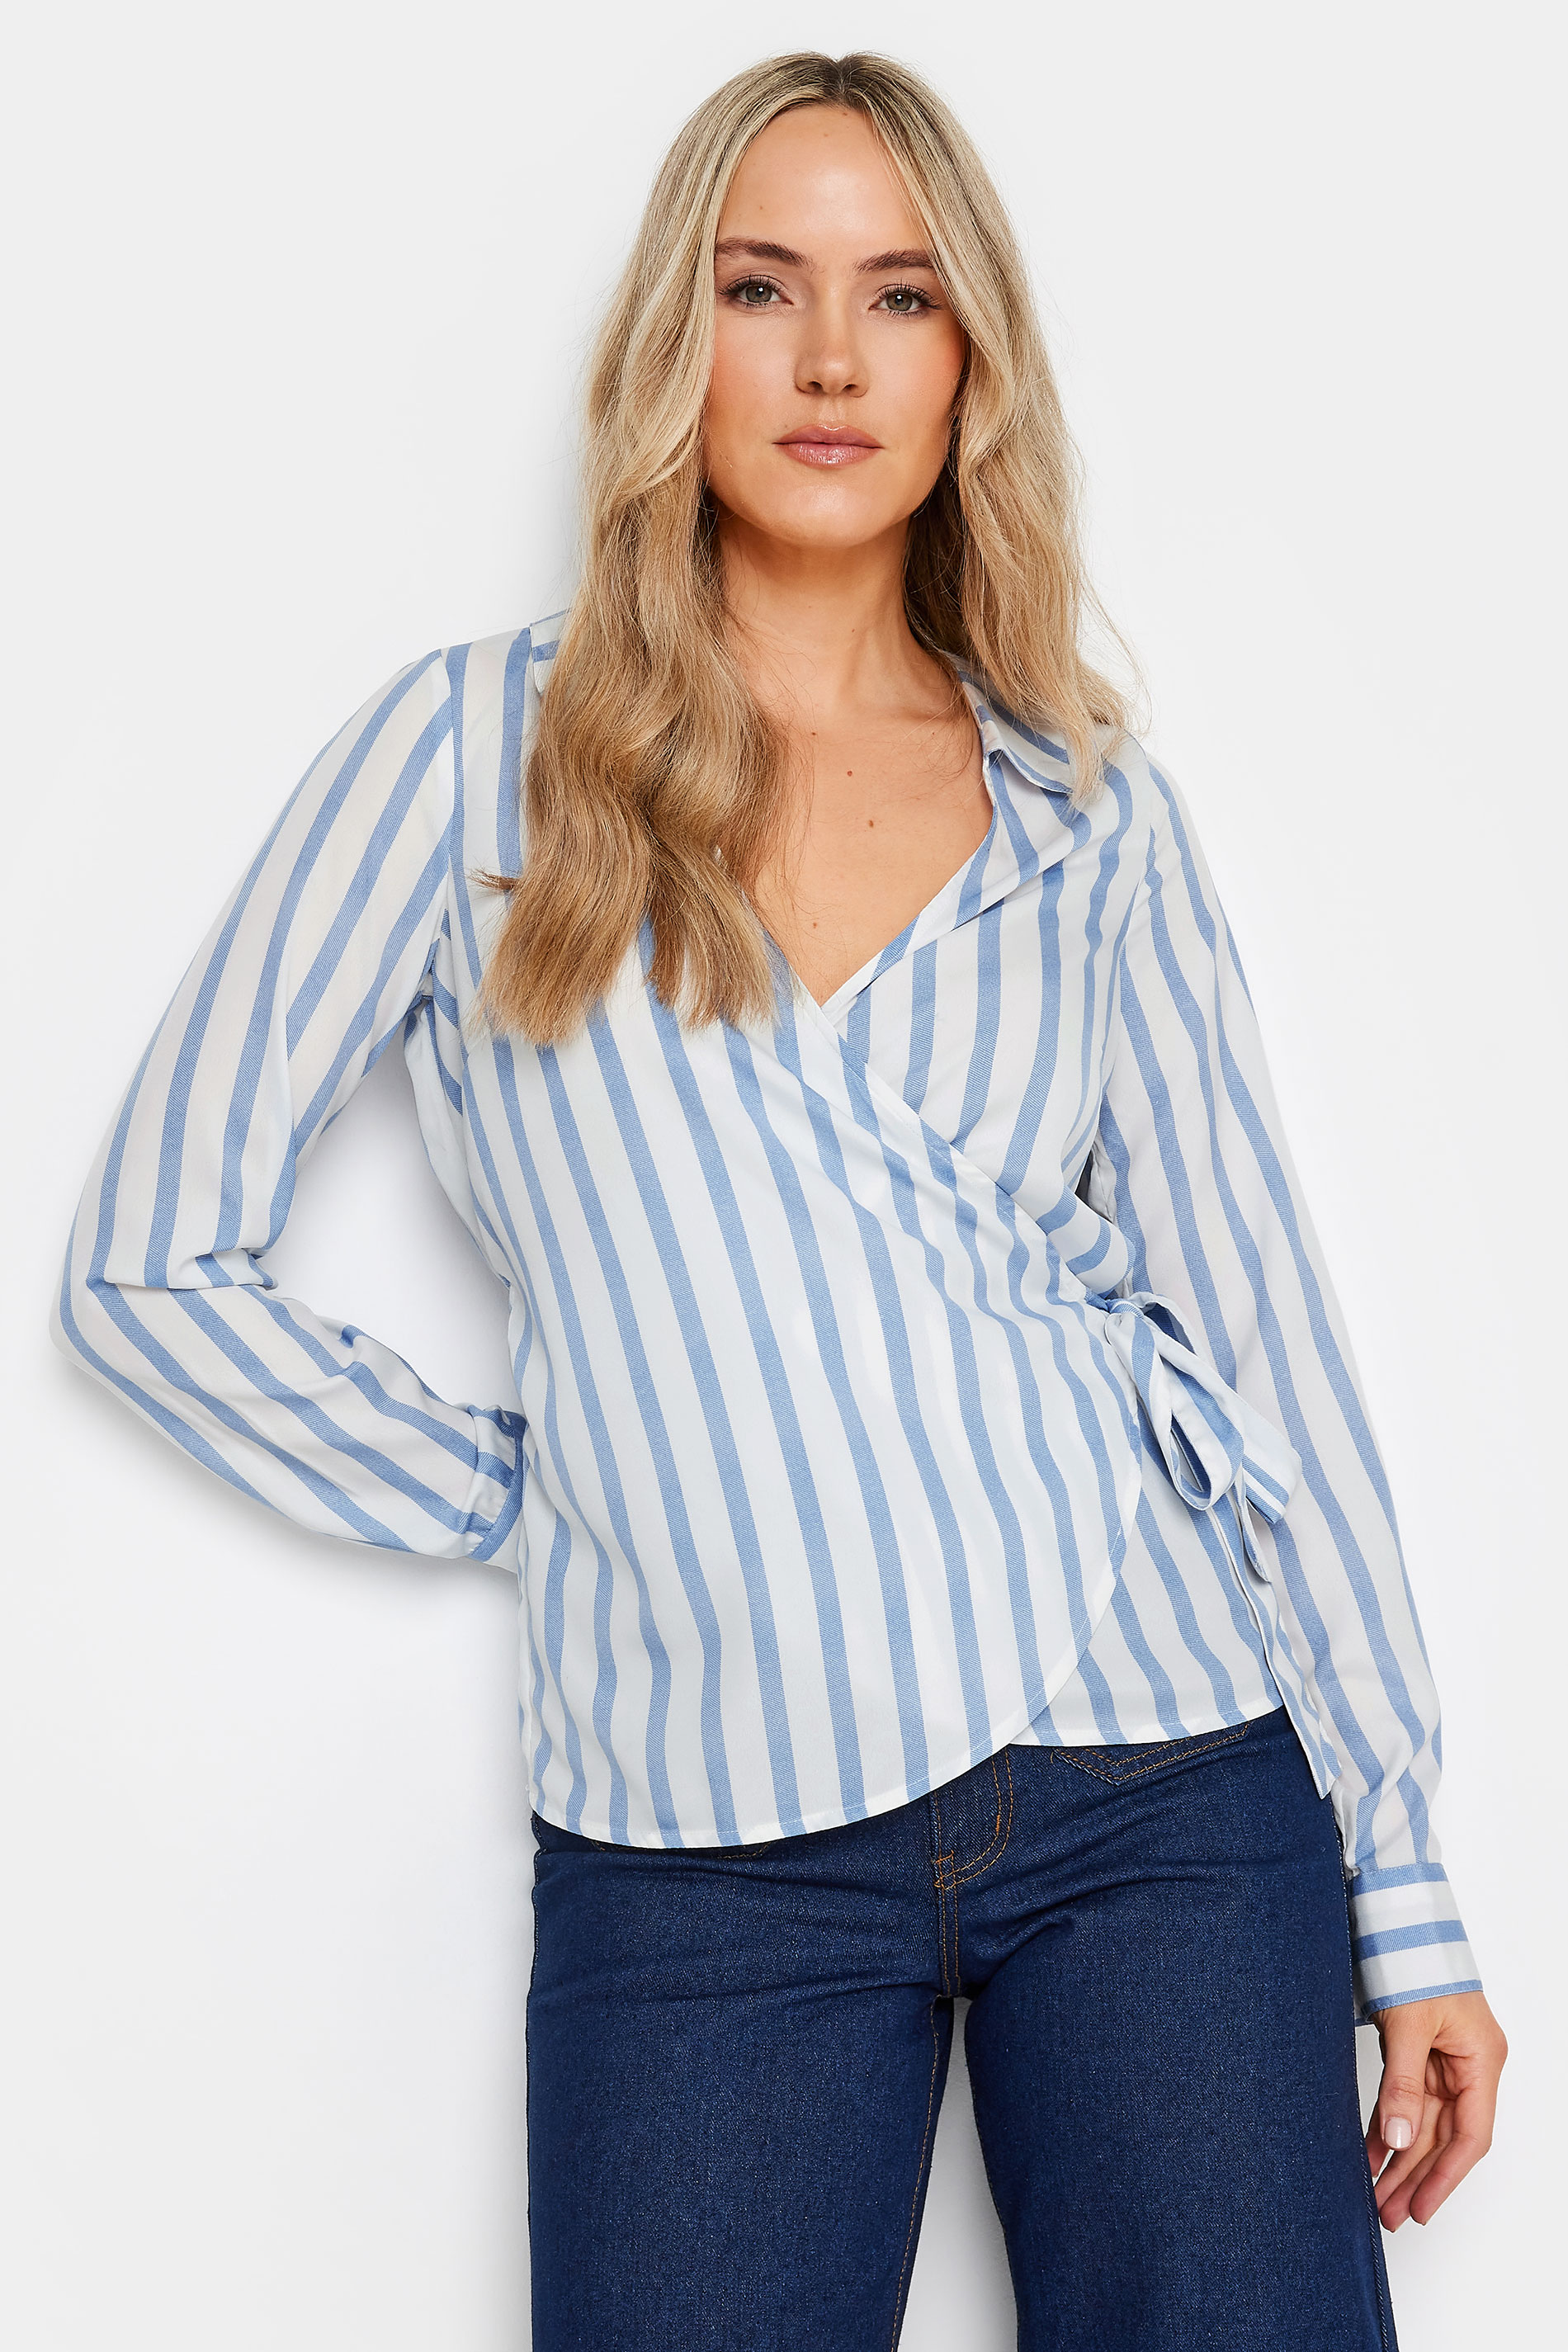 LTS Tall Womens Blue & White Stripe Collared Wrap Top | Long Tall Sally 2